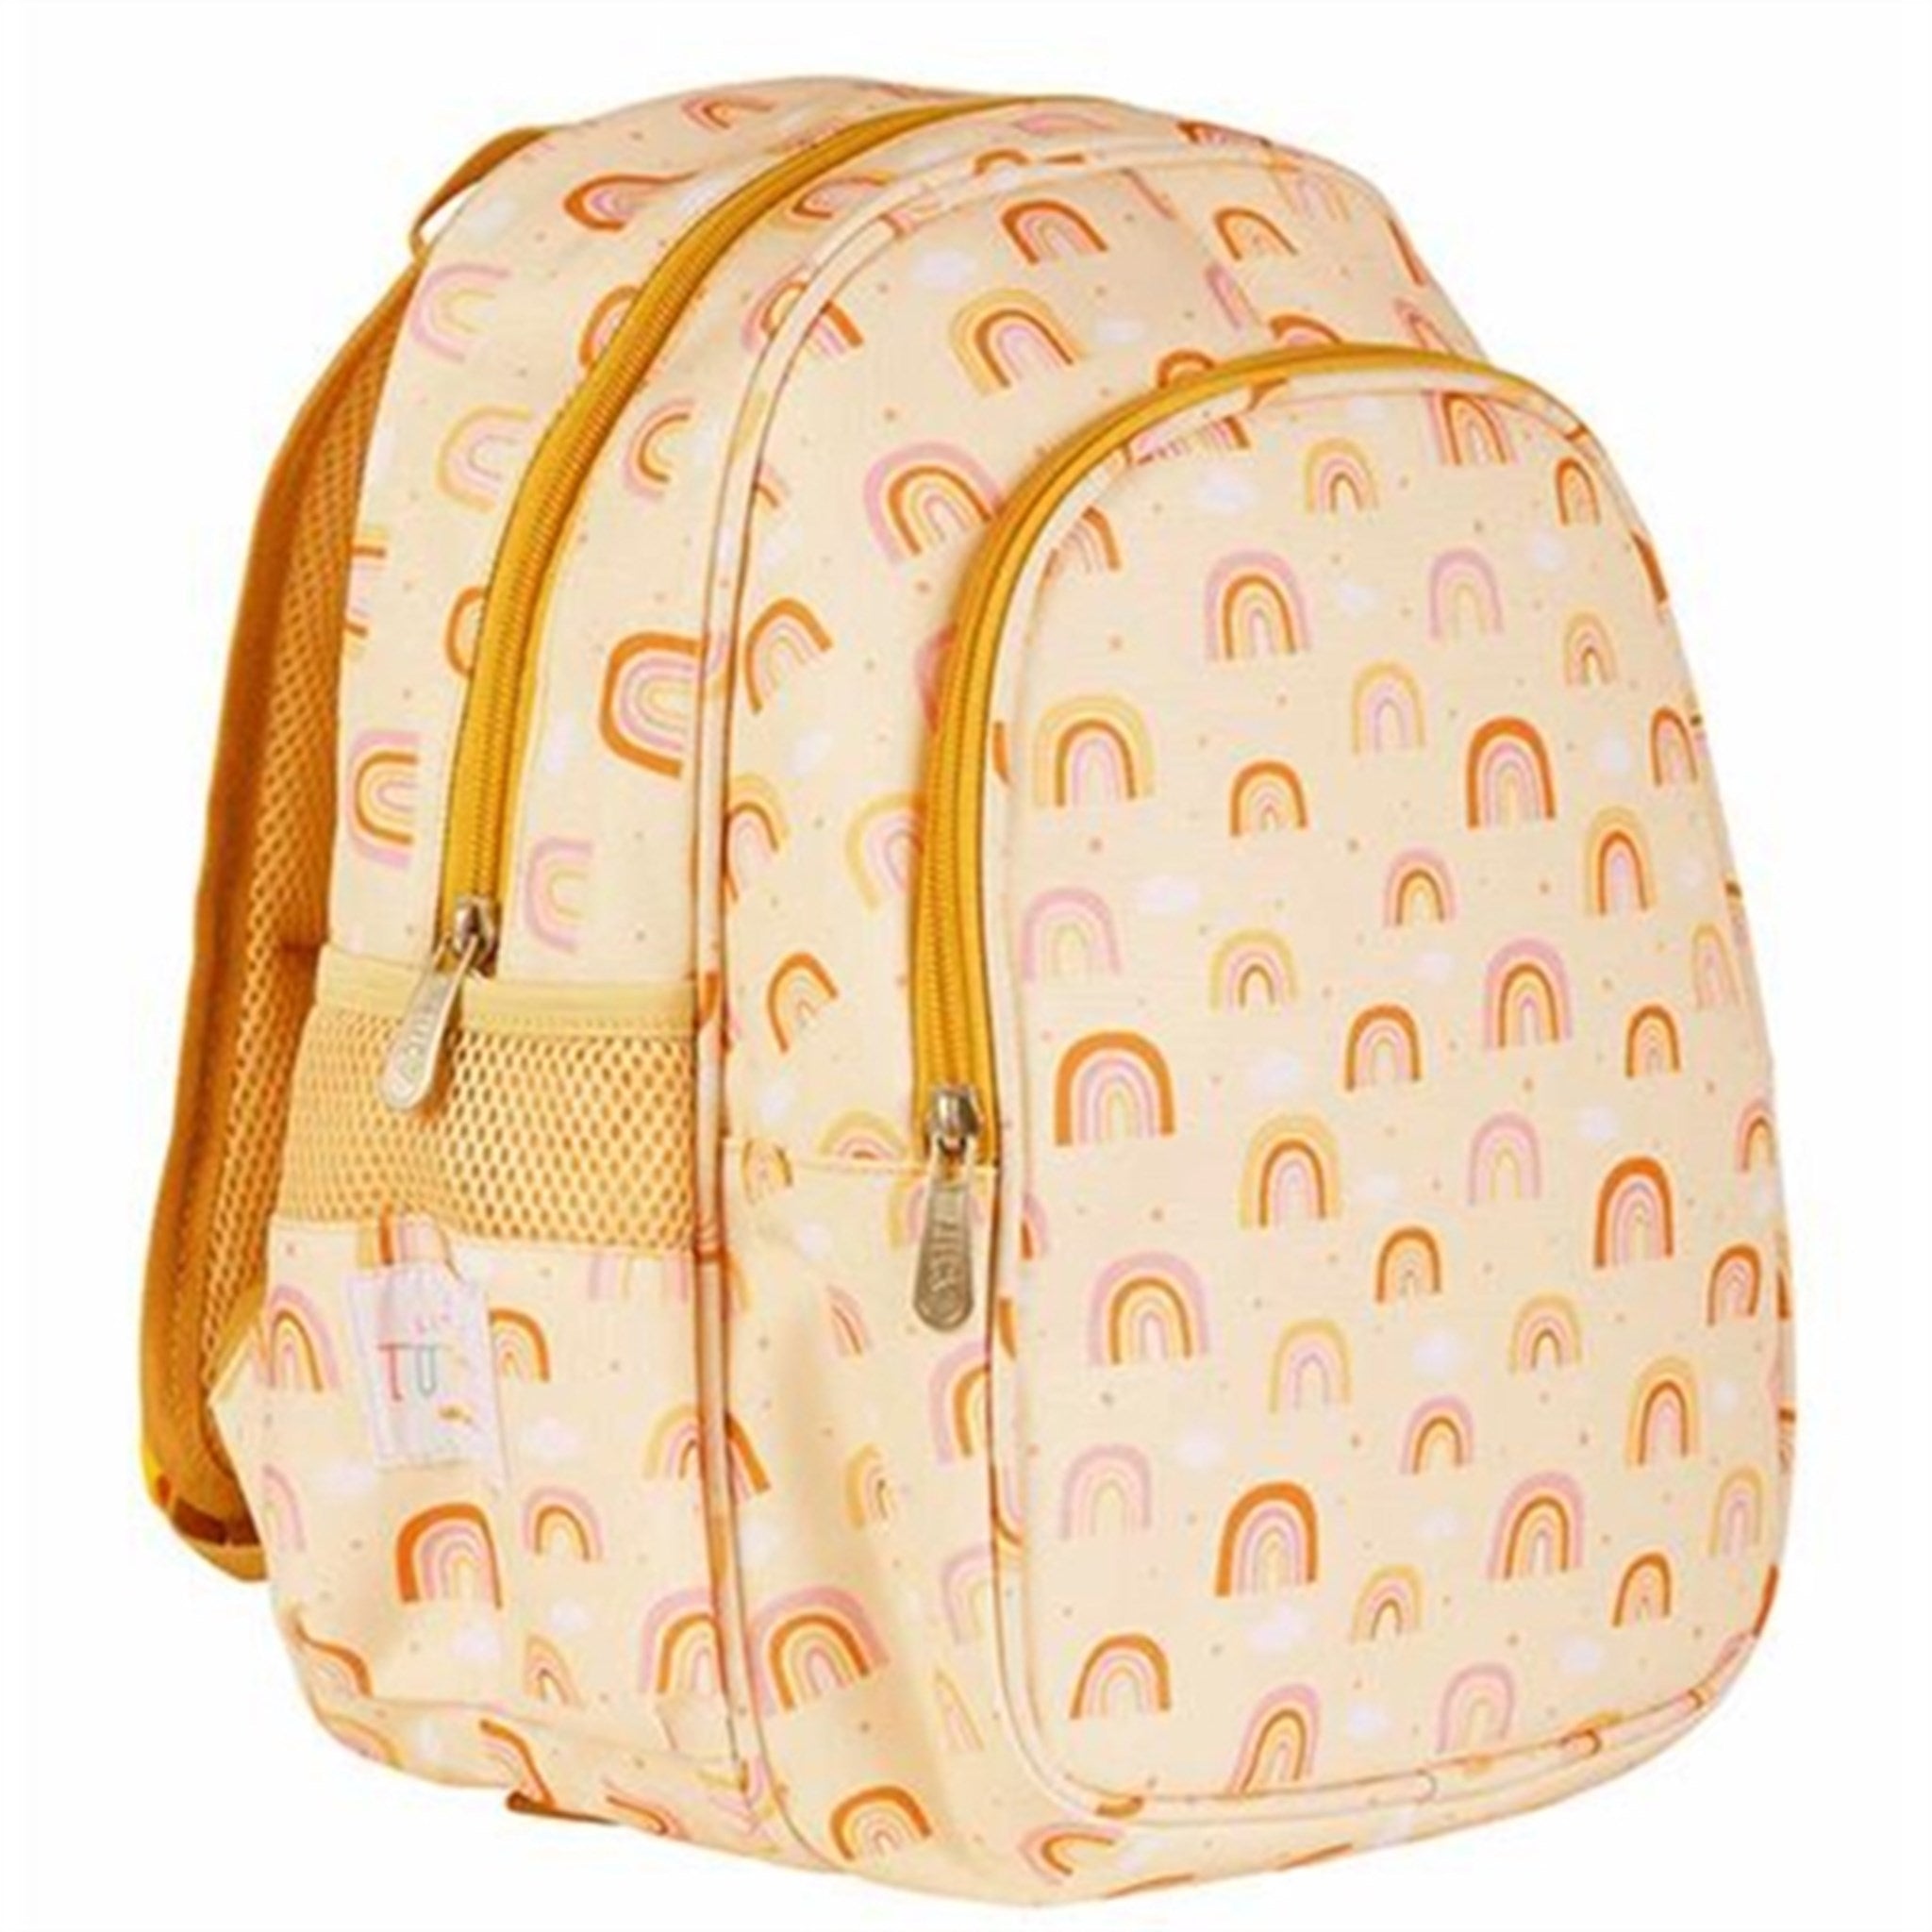 A Little Lovely Company Backpack Rainbows 7